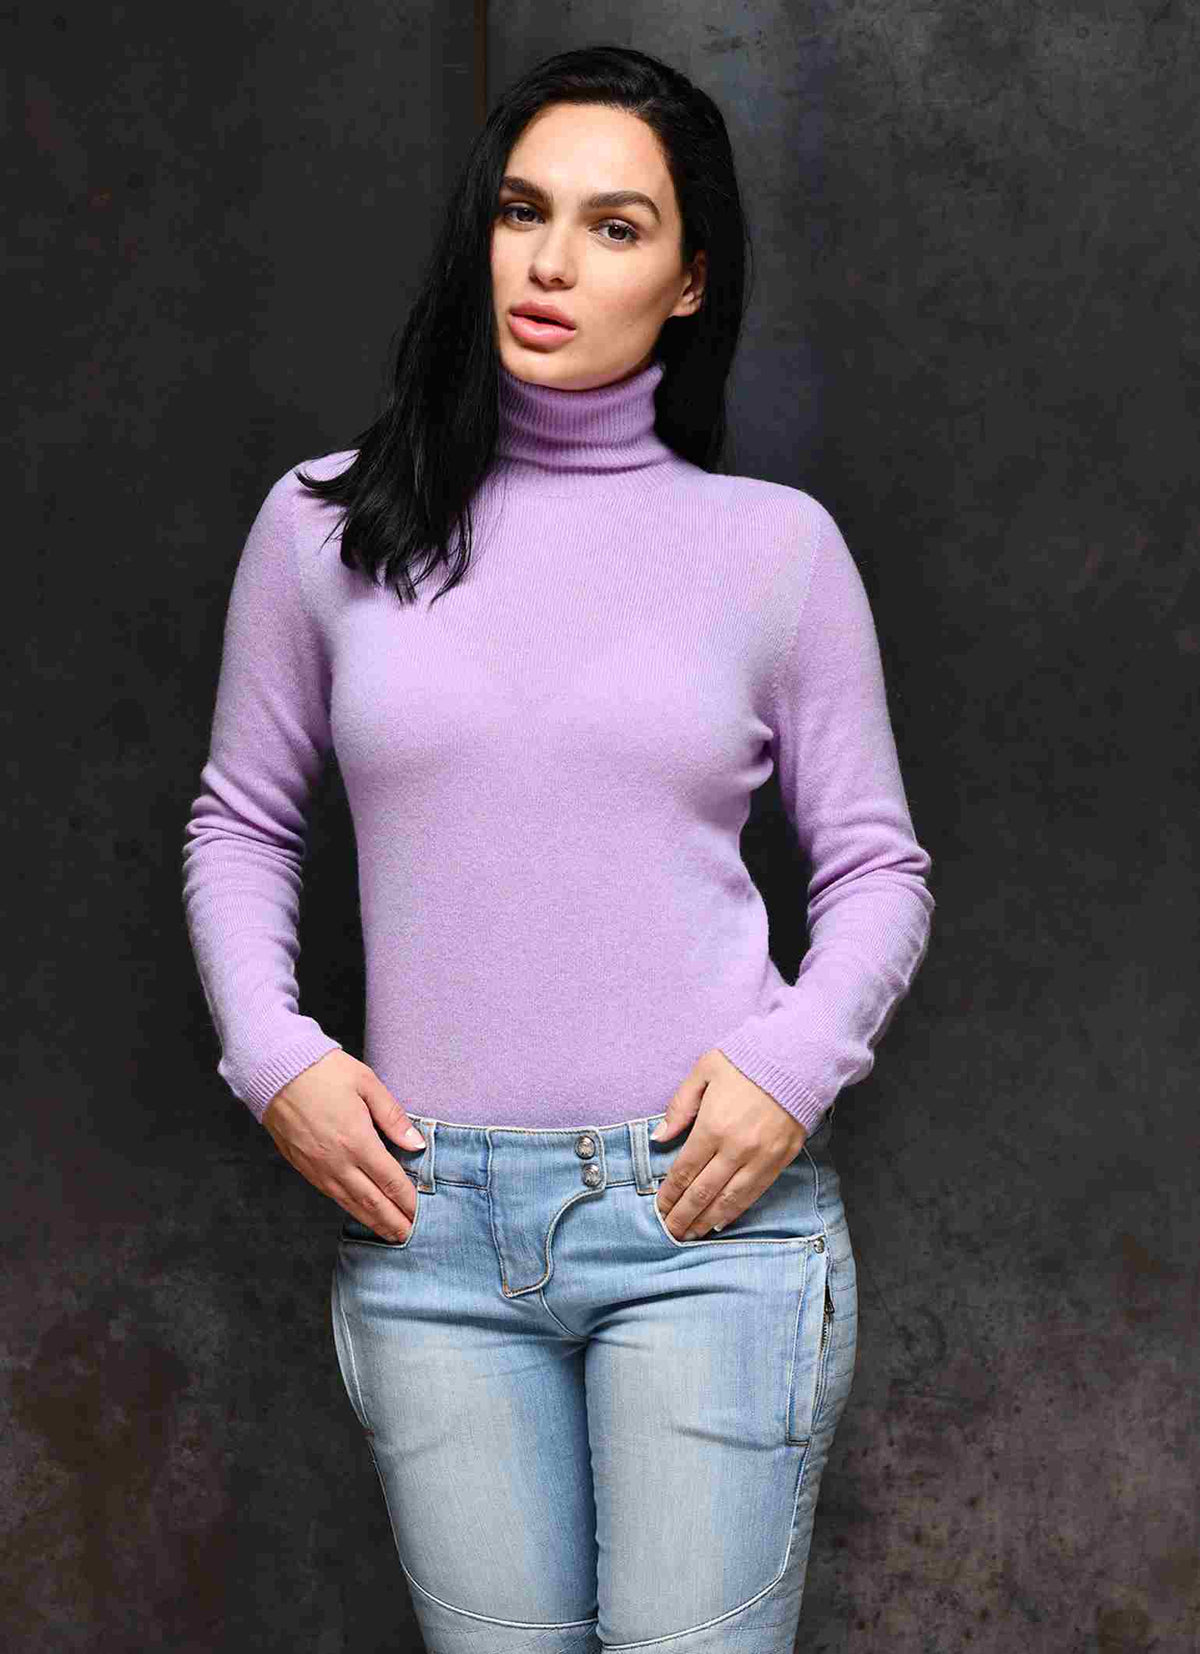 Women wearing turtleneck cashmere sweaters which are made from soft Italian cashmere in color violet